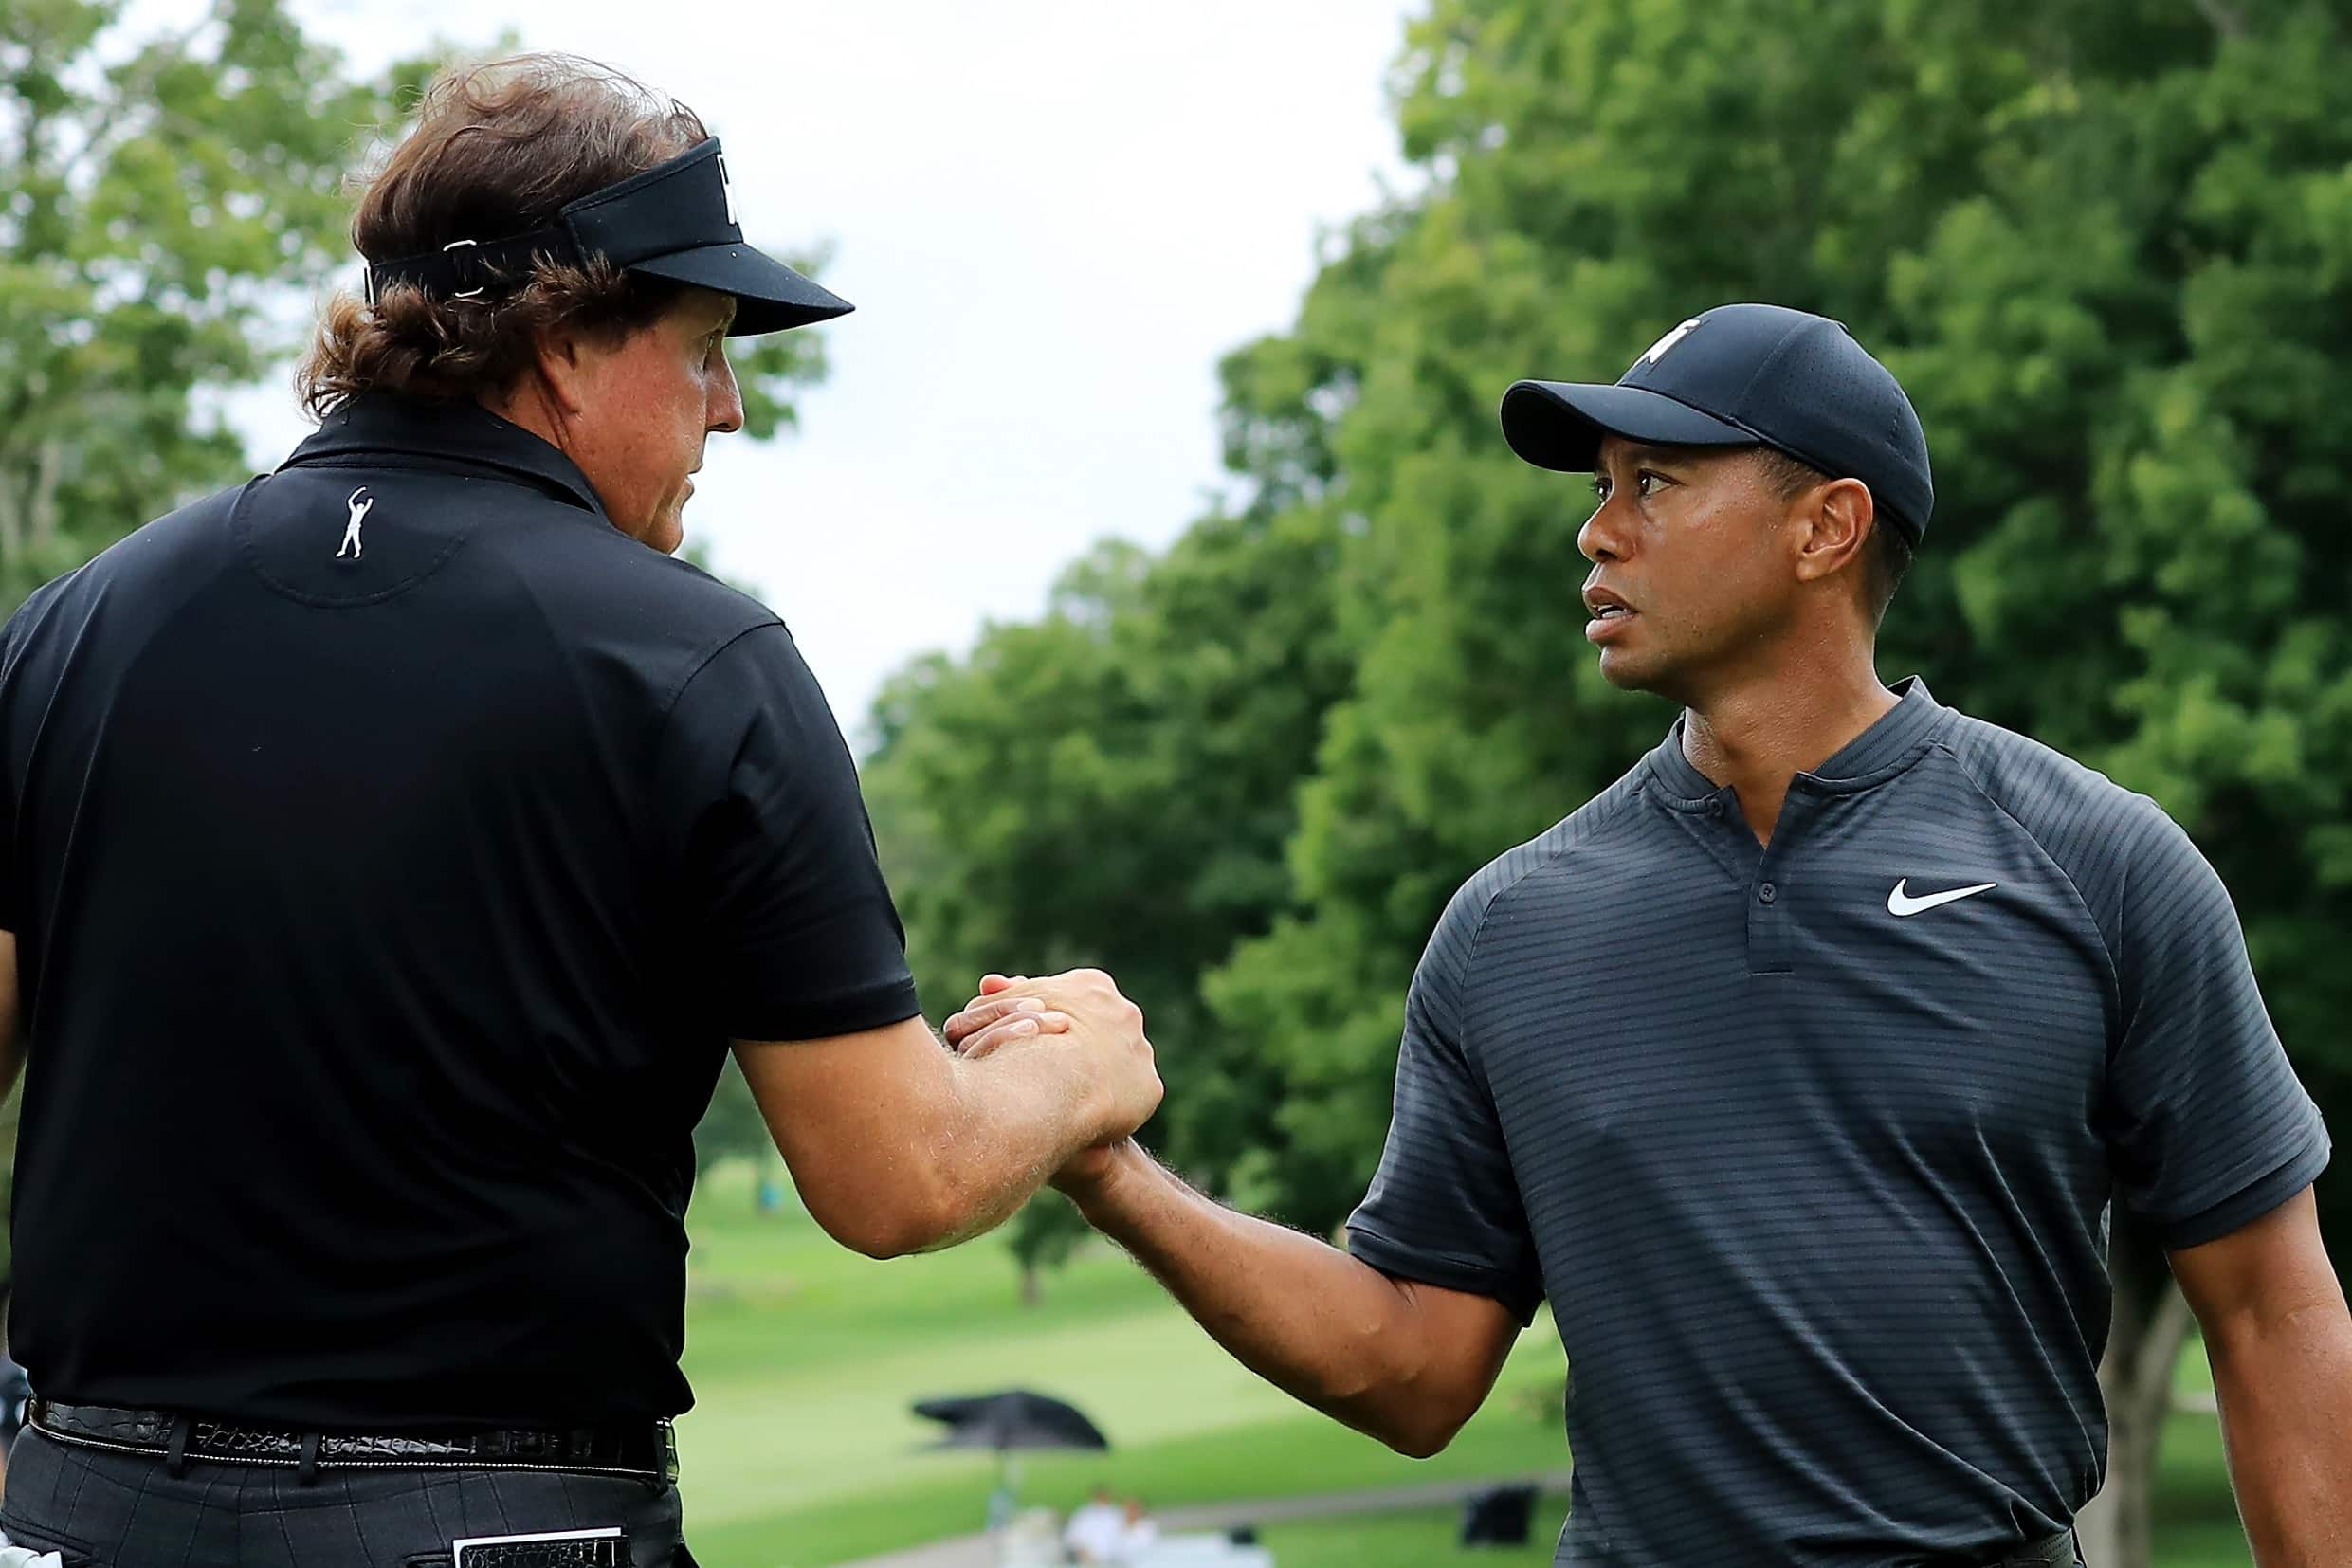 Tiger Woods Vs Phil Mickelson get ready for The Match this Sunday